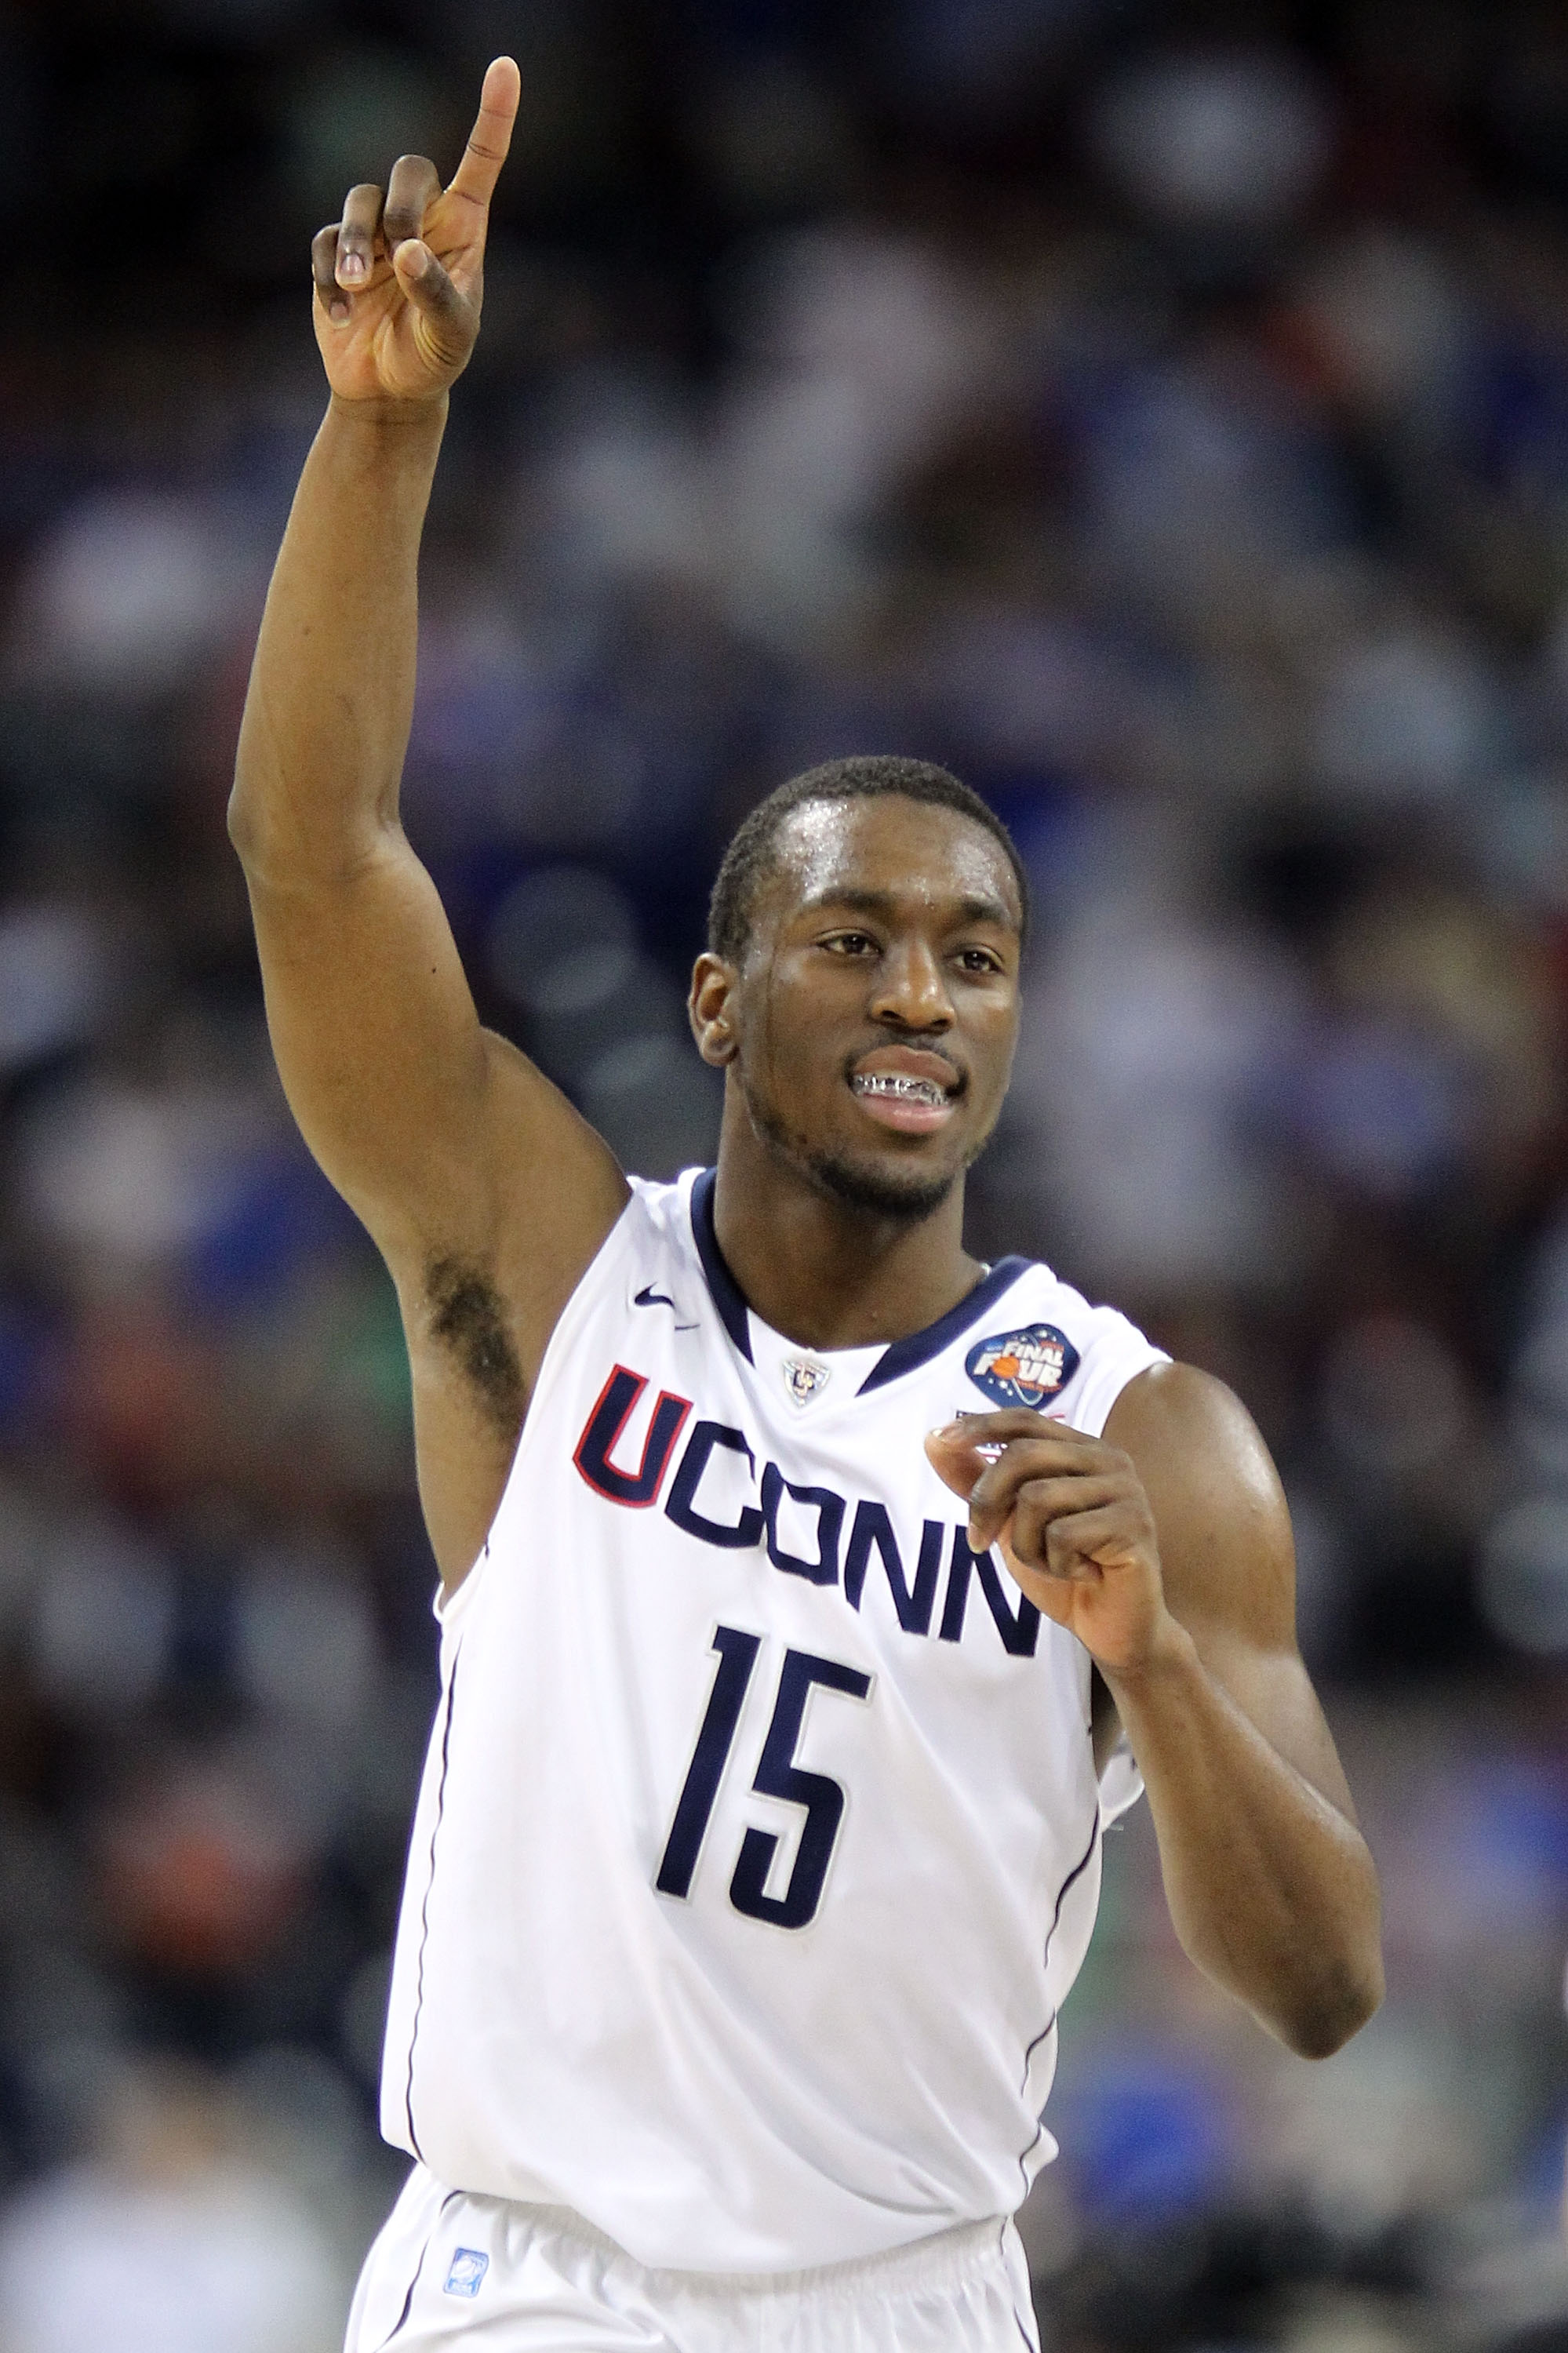 HOUSTON, TX - APRIL 02:  Kemba Walker #15 of the Connecticut Huskies reacts towards the end of the game against the Kentucky Wildcats during the National Semifinal game of the 2011 NCAA Division I Men's Basketball Championship at Reliant Stadium on April